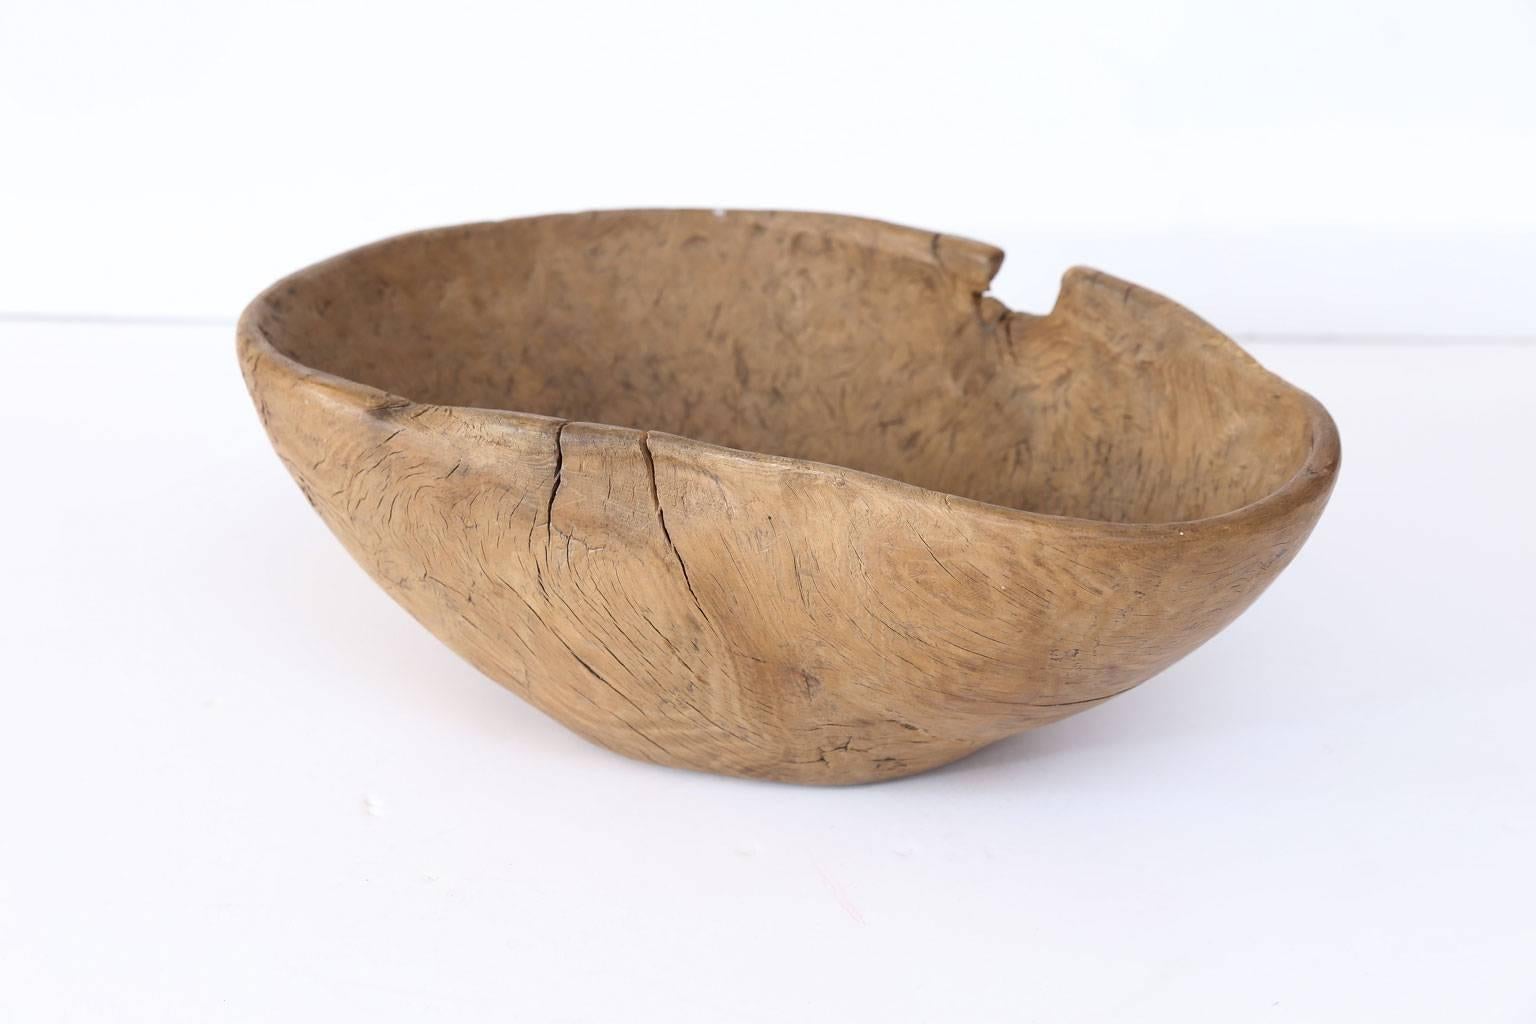 Set of three decorative 19th century root wood bowls (top to bottom):

Measures: Large hand-carved burled oval shape root wood bowl with exquisite patina and maker's initials, 5.5 inches high x 15.25 inches wide x 10 inches deep.
Hand-carved